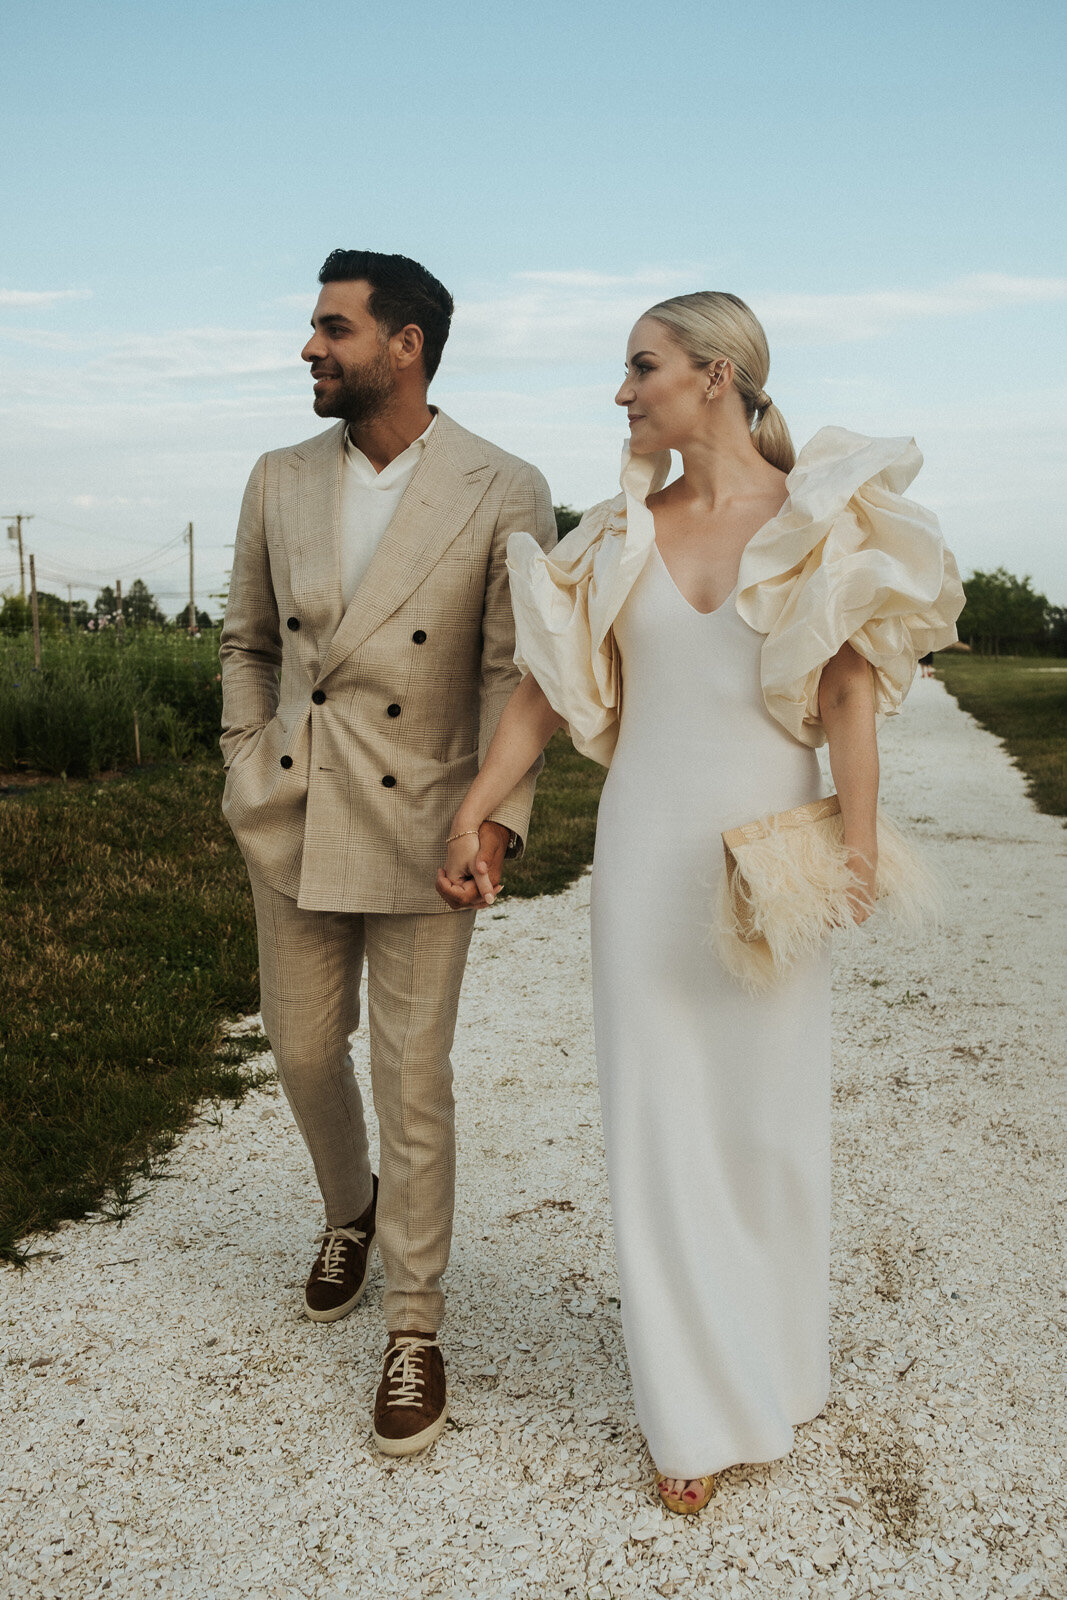 Kate-Murtaugh-Events-Weatherlow-Farms-bride-groom-welcome-party-South Coast-MA